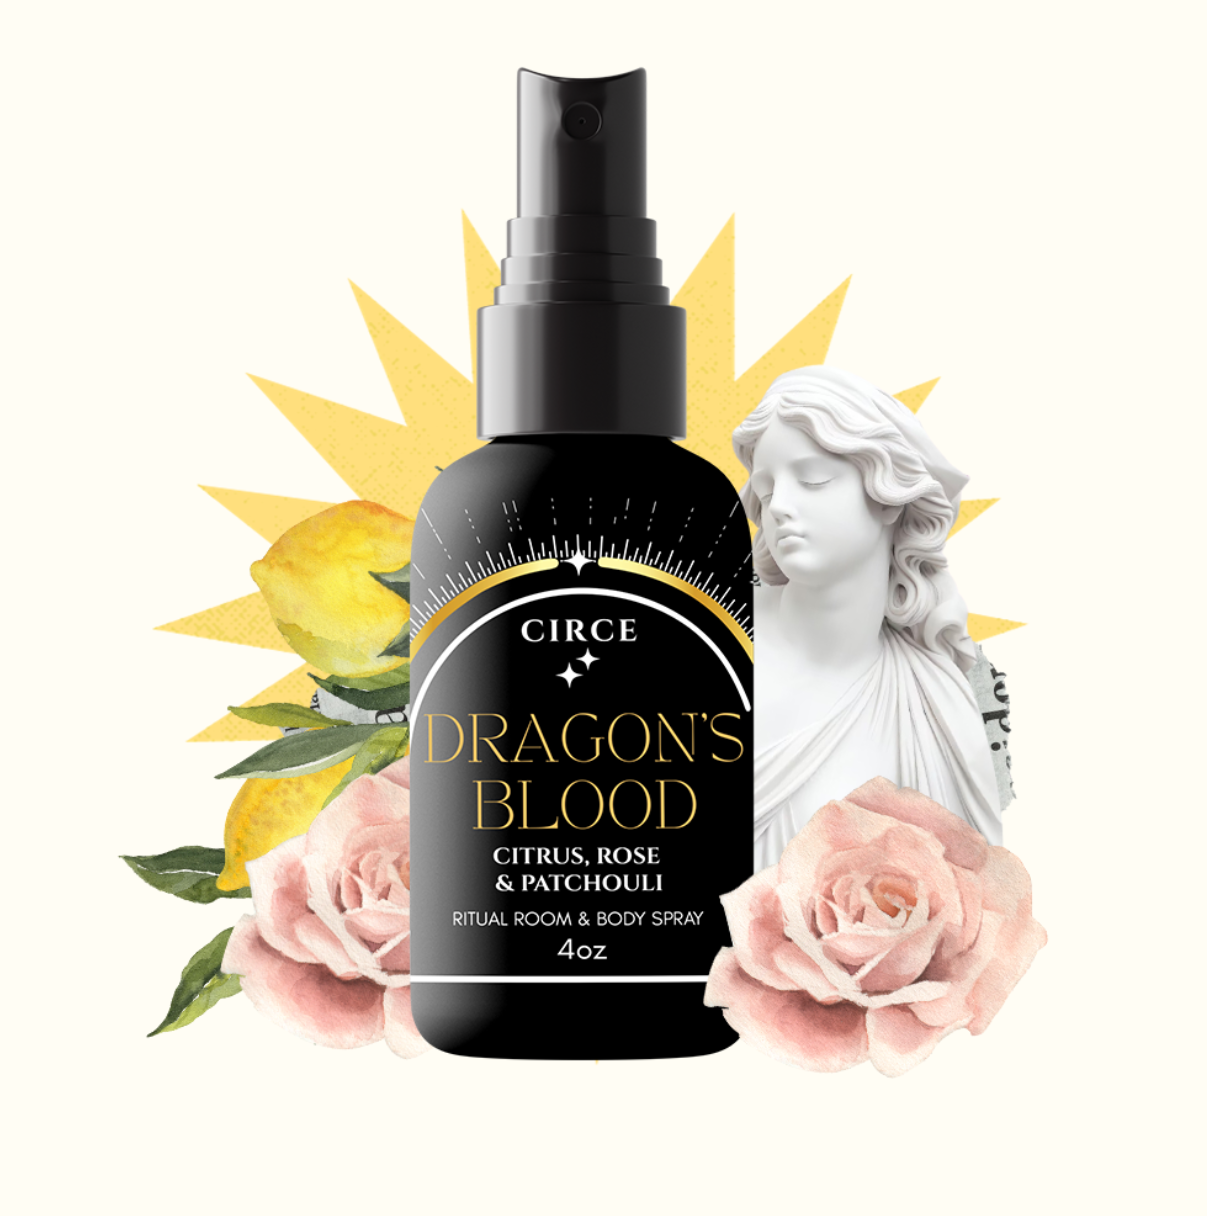 CIRCE Dragon's Blood Ritual Room and Body Spray 4 oz.  from Circe Boutique